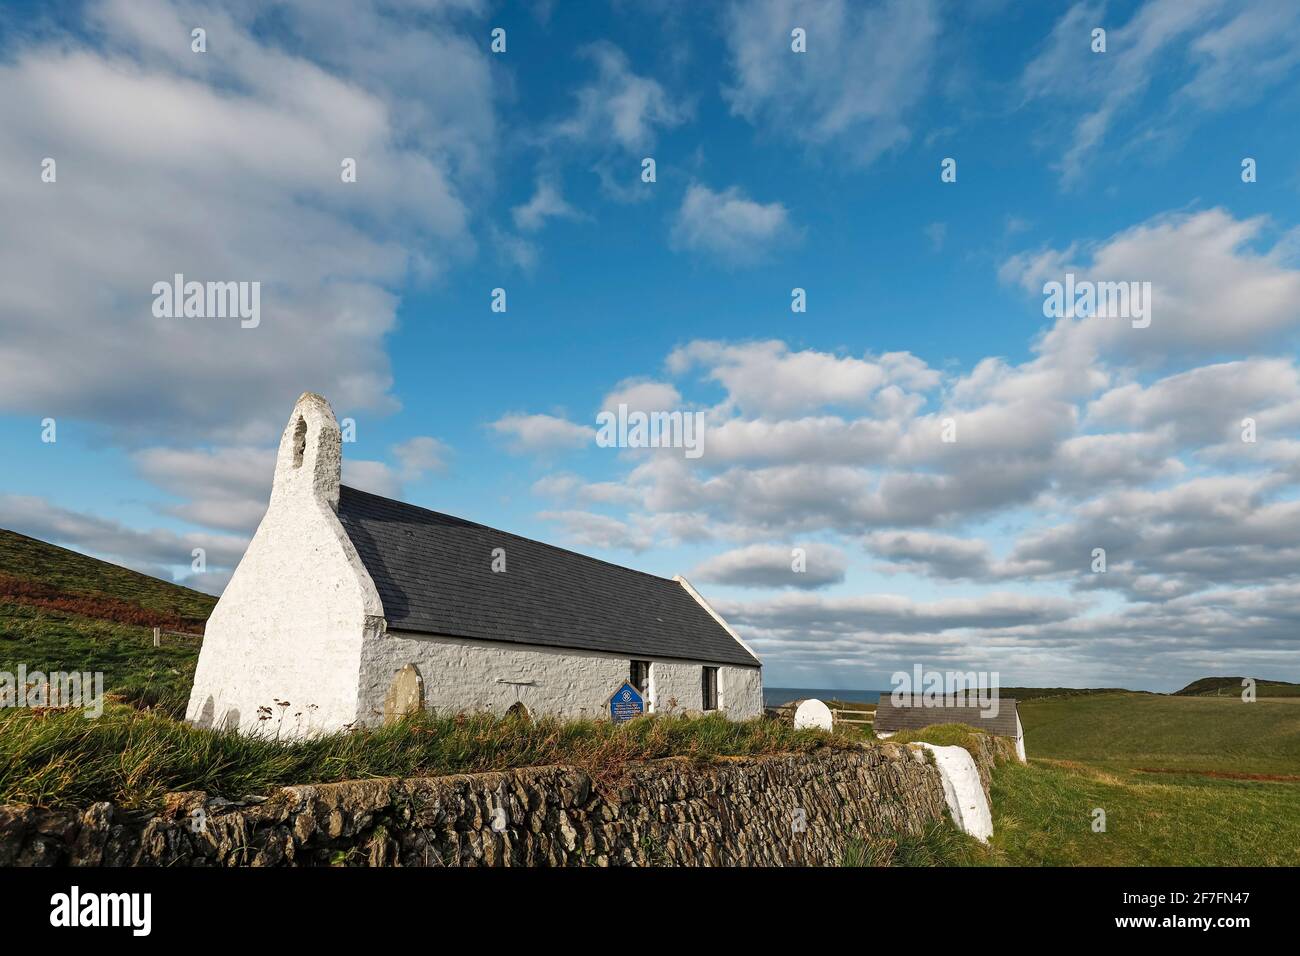 The 13th century Church of the Holy Cross, a Grade 1 listed parish church near popular Mwnt beach, Mwnt, Ceredigion, Wales, United Kingdom, Europe Stock Photo